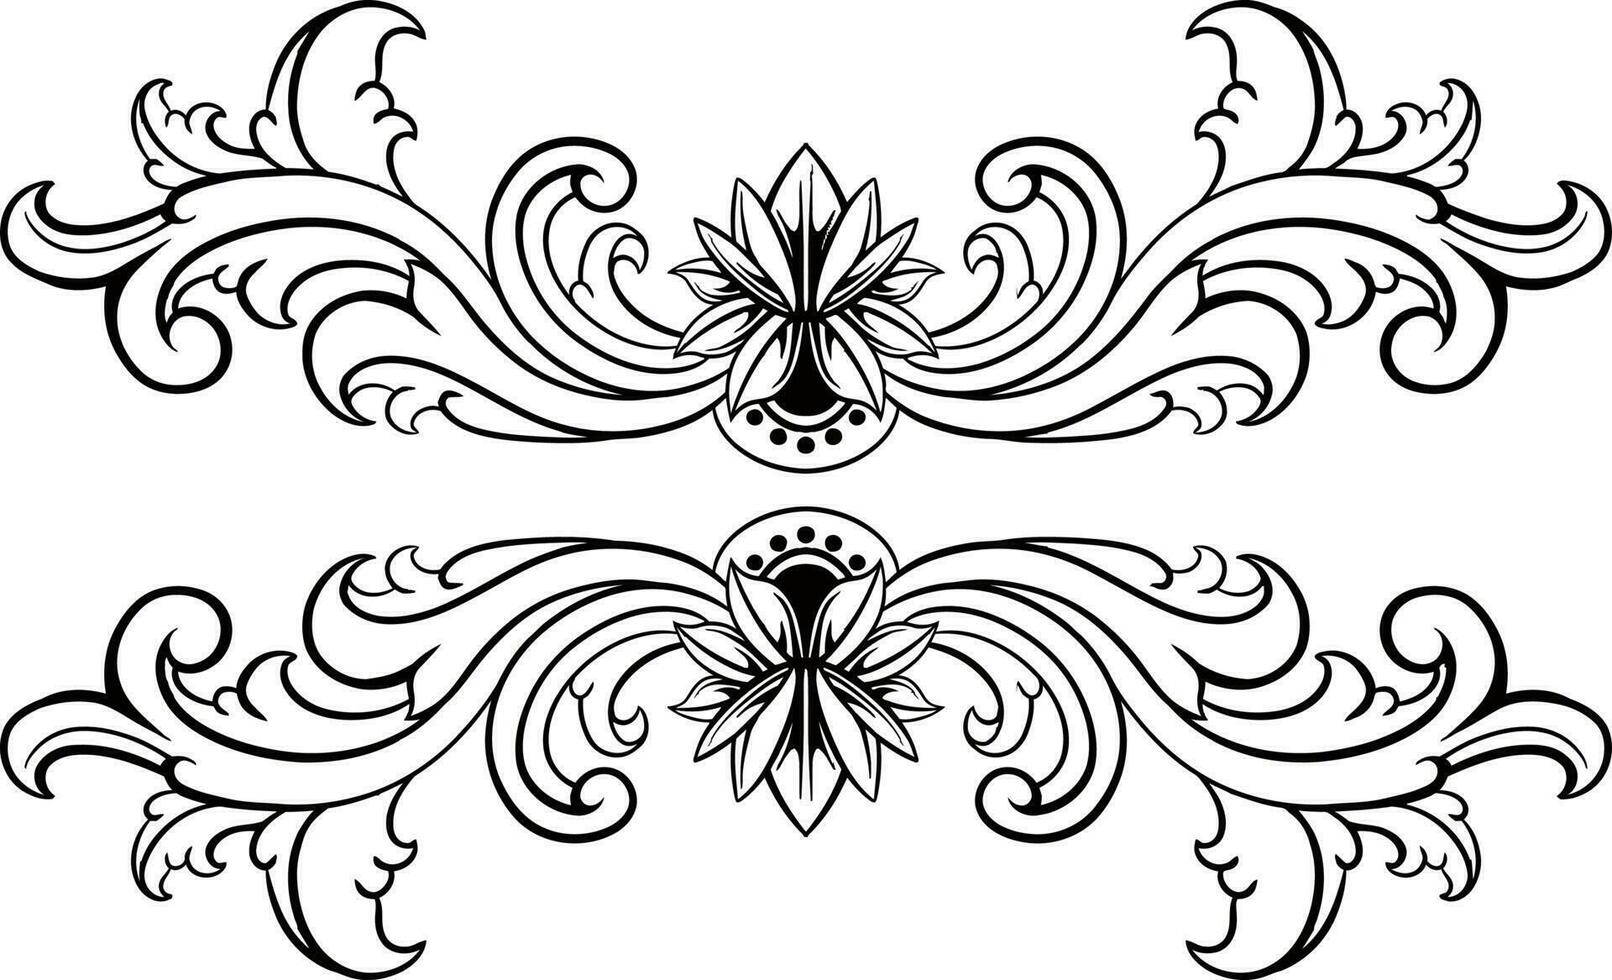 Line art of beautiful carved decorative ornament vector